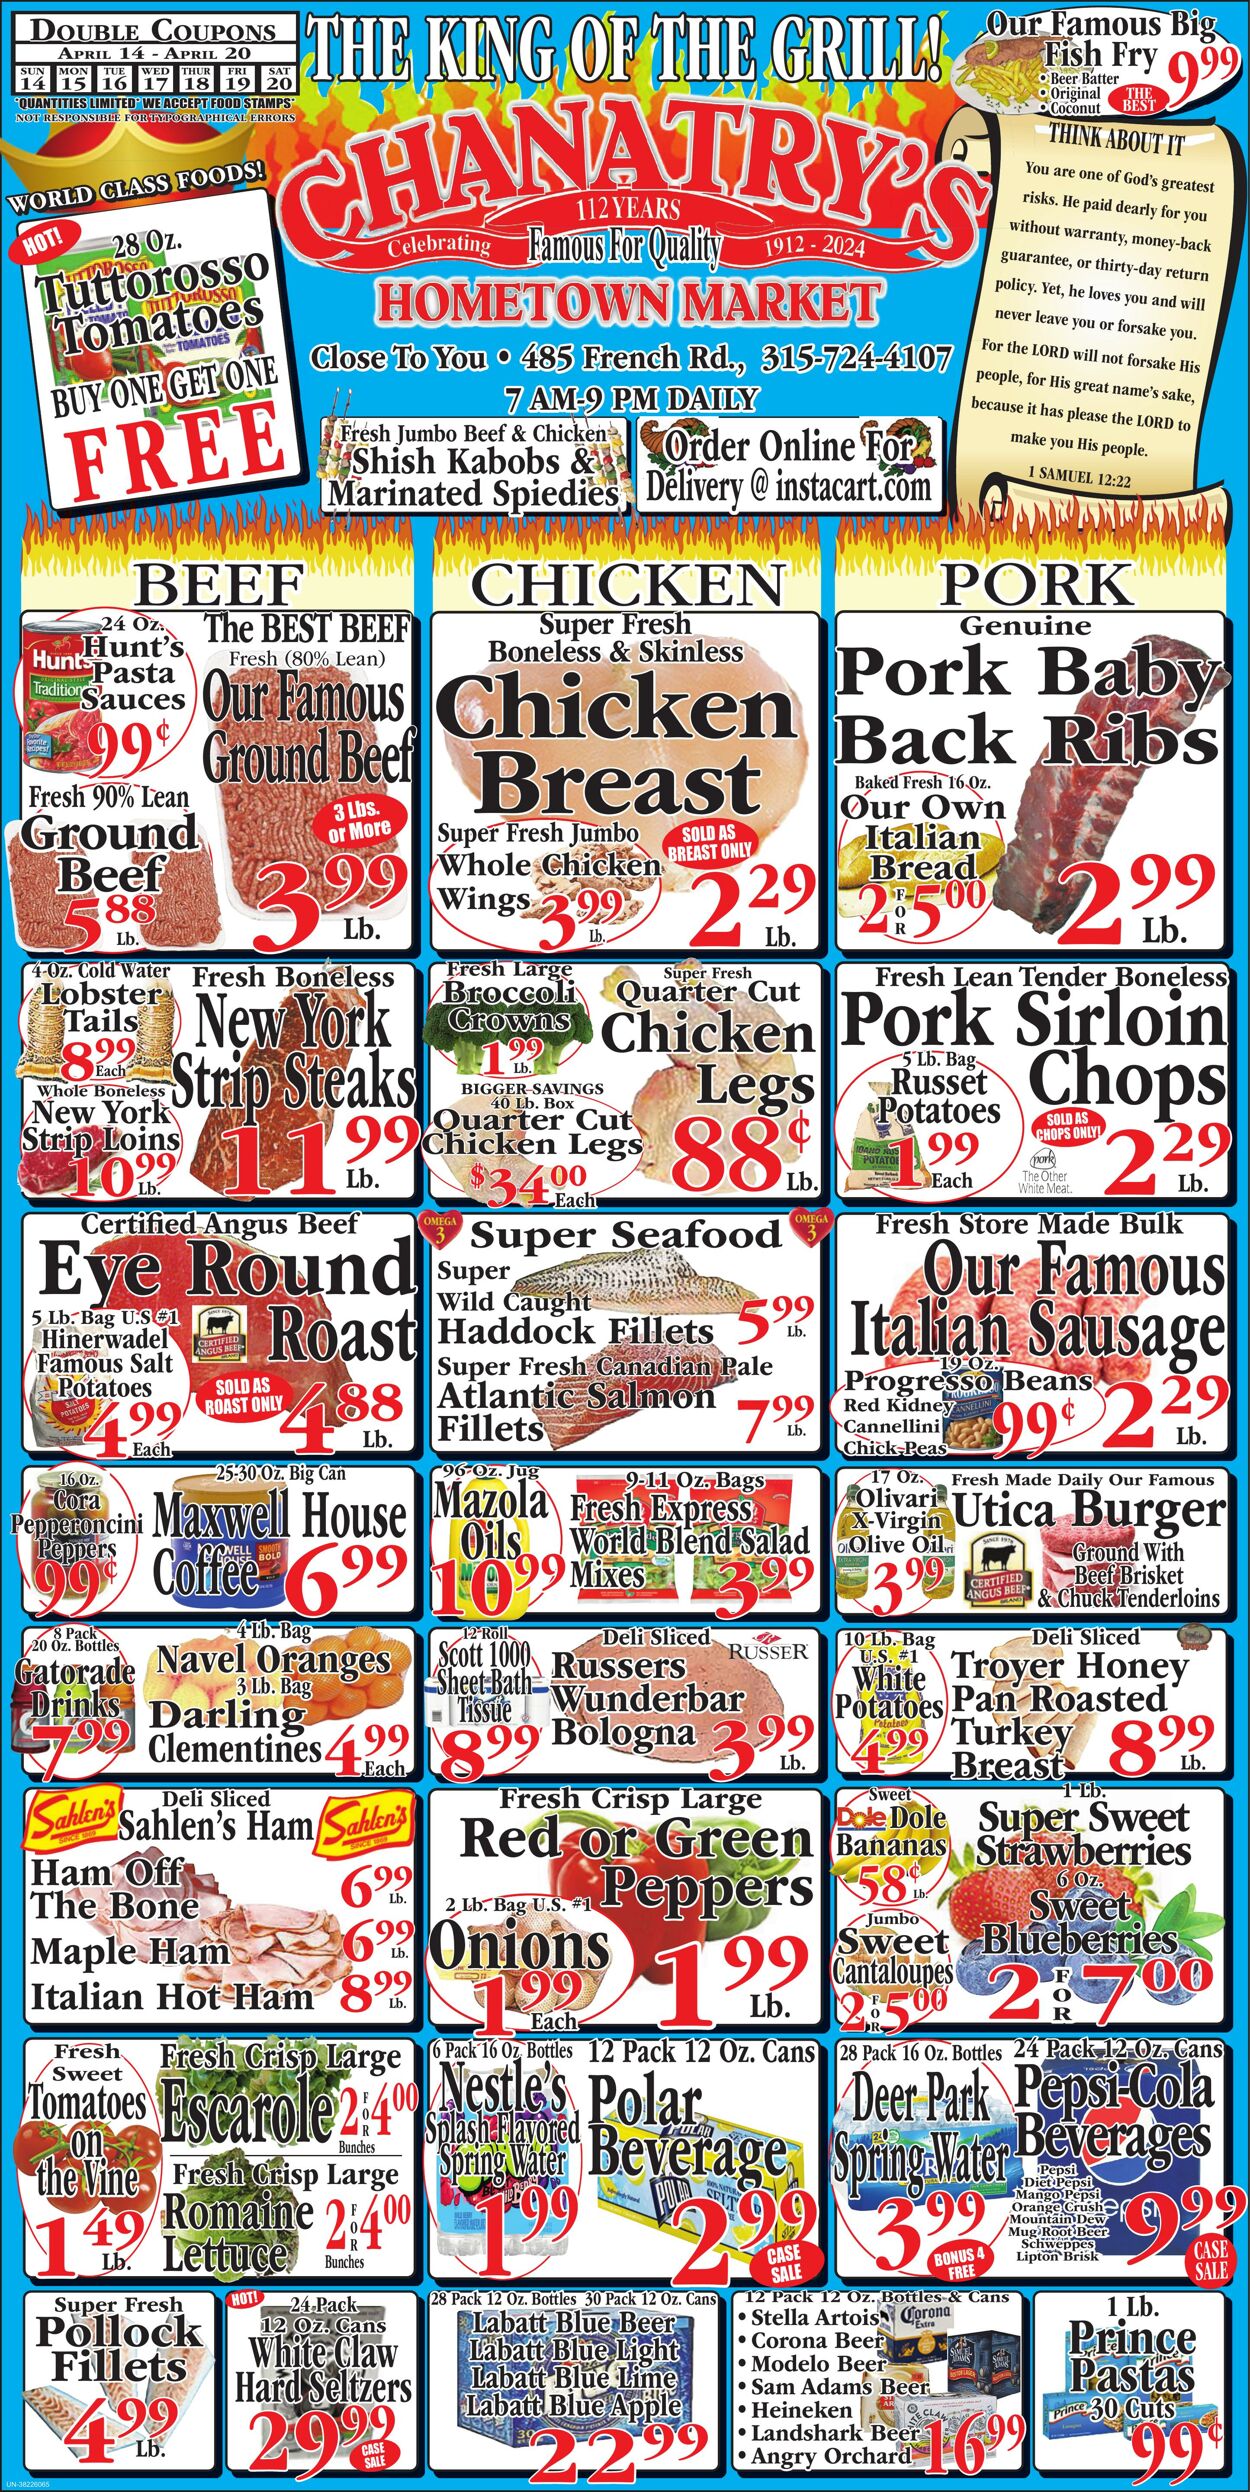 Chanatry's Hometown Market Promotional weekly ads